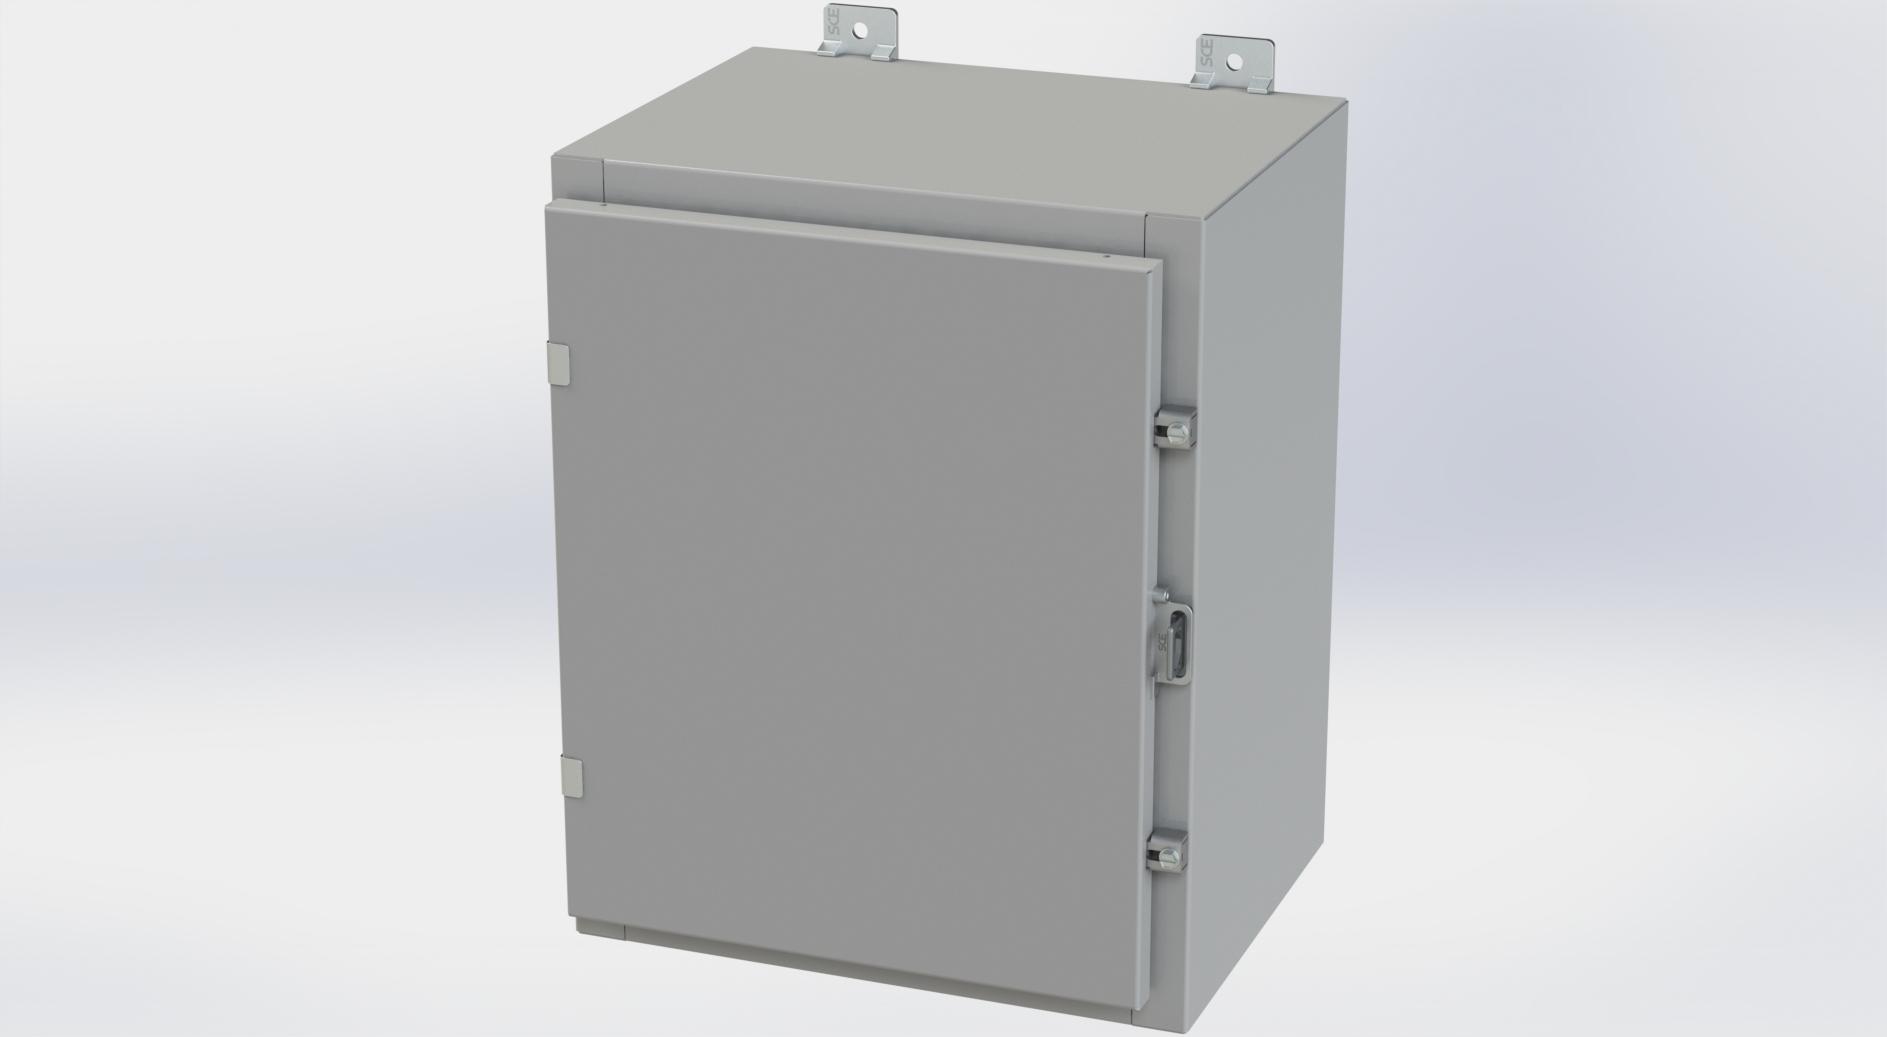 Saginaw Control SCE-20H1612LP Nema 4 LP Enclosure, Height:20.00", Width:16.00", Depth:12.00", ANSI-61 gray powder coating inside and out. Optional panels are powder coated white.